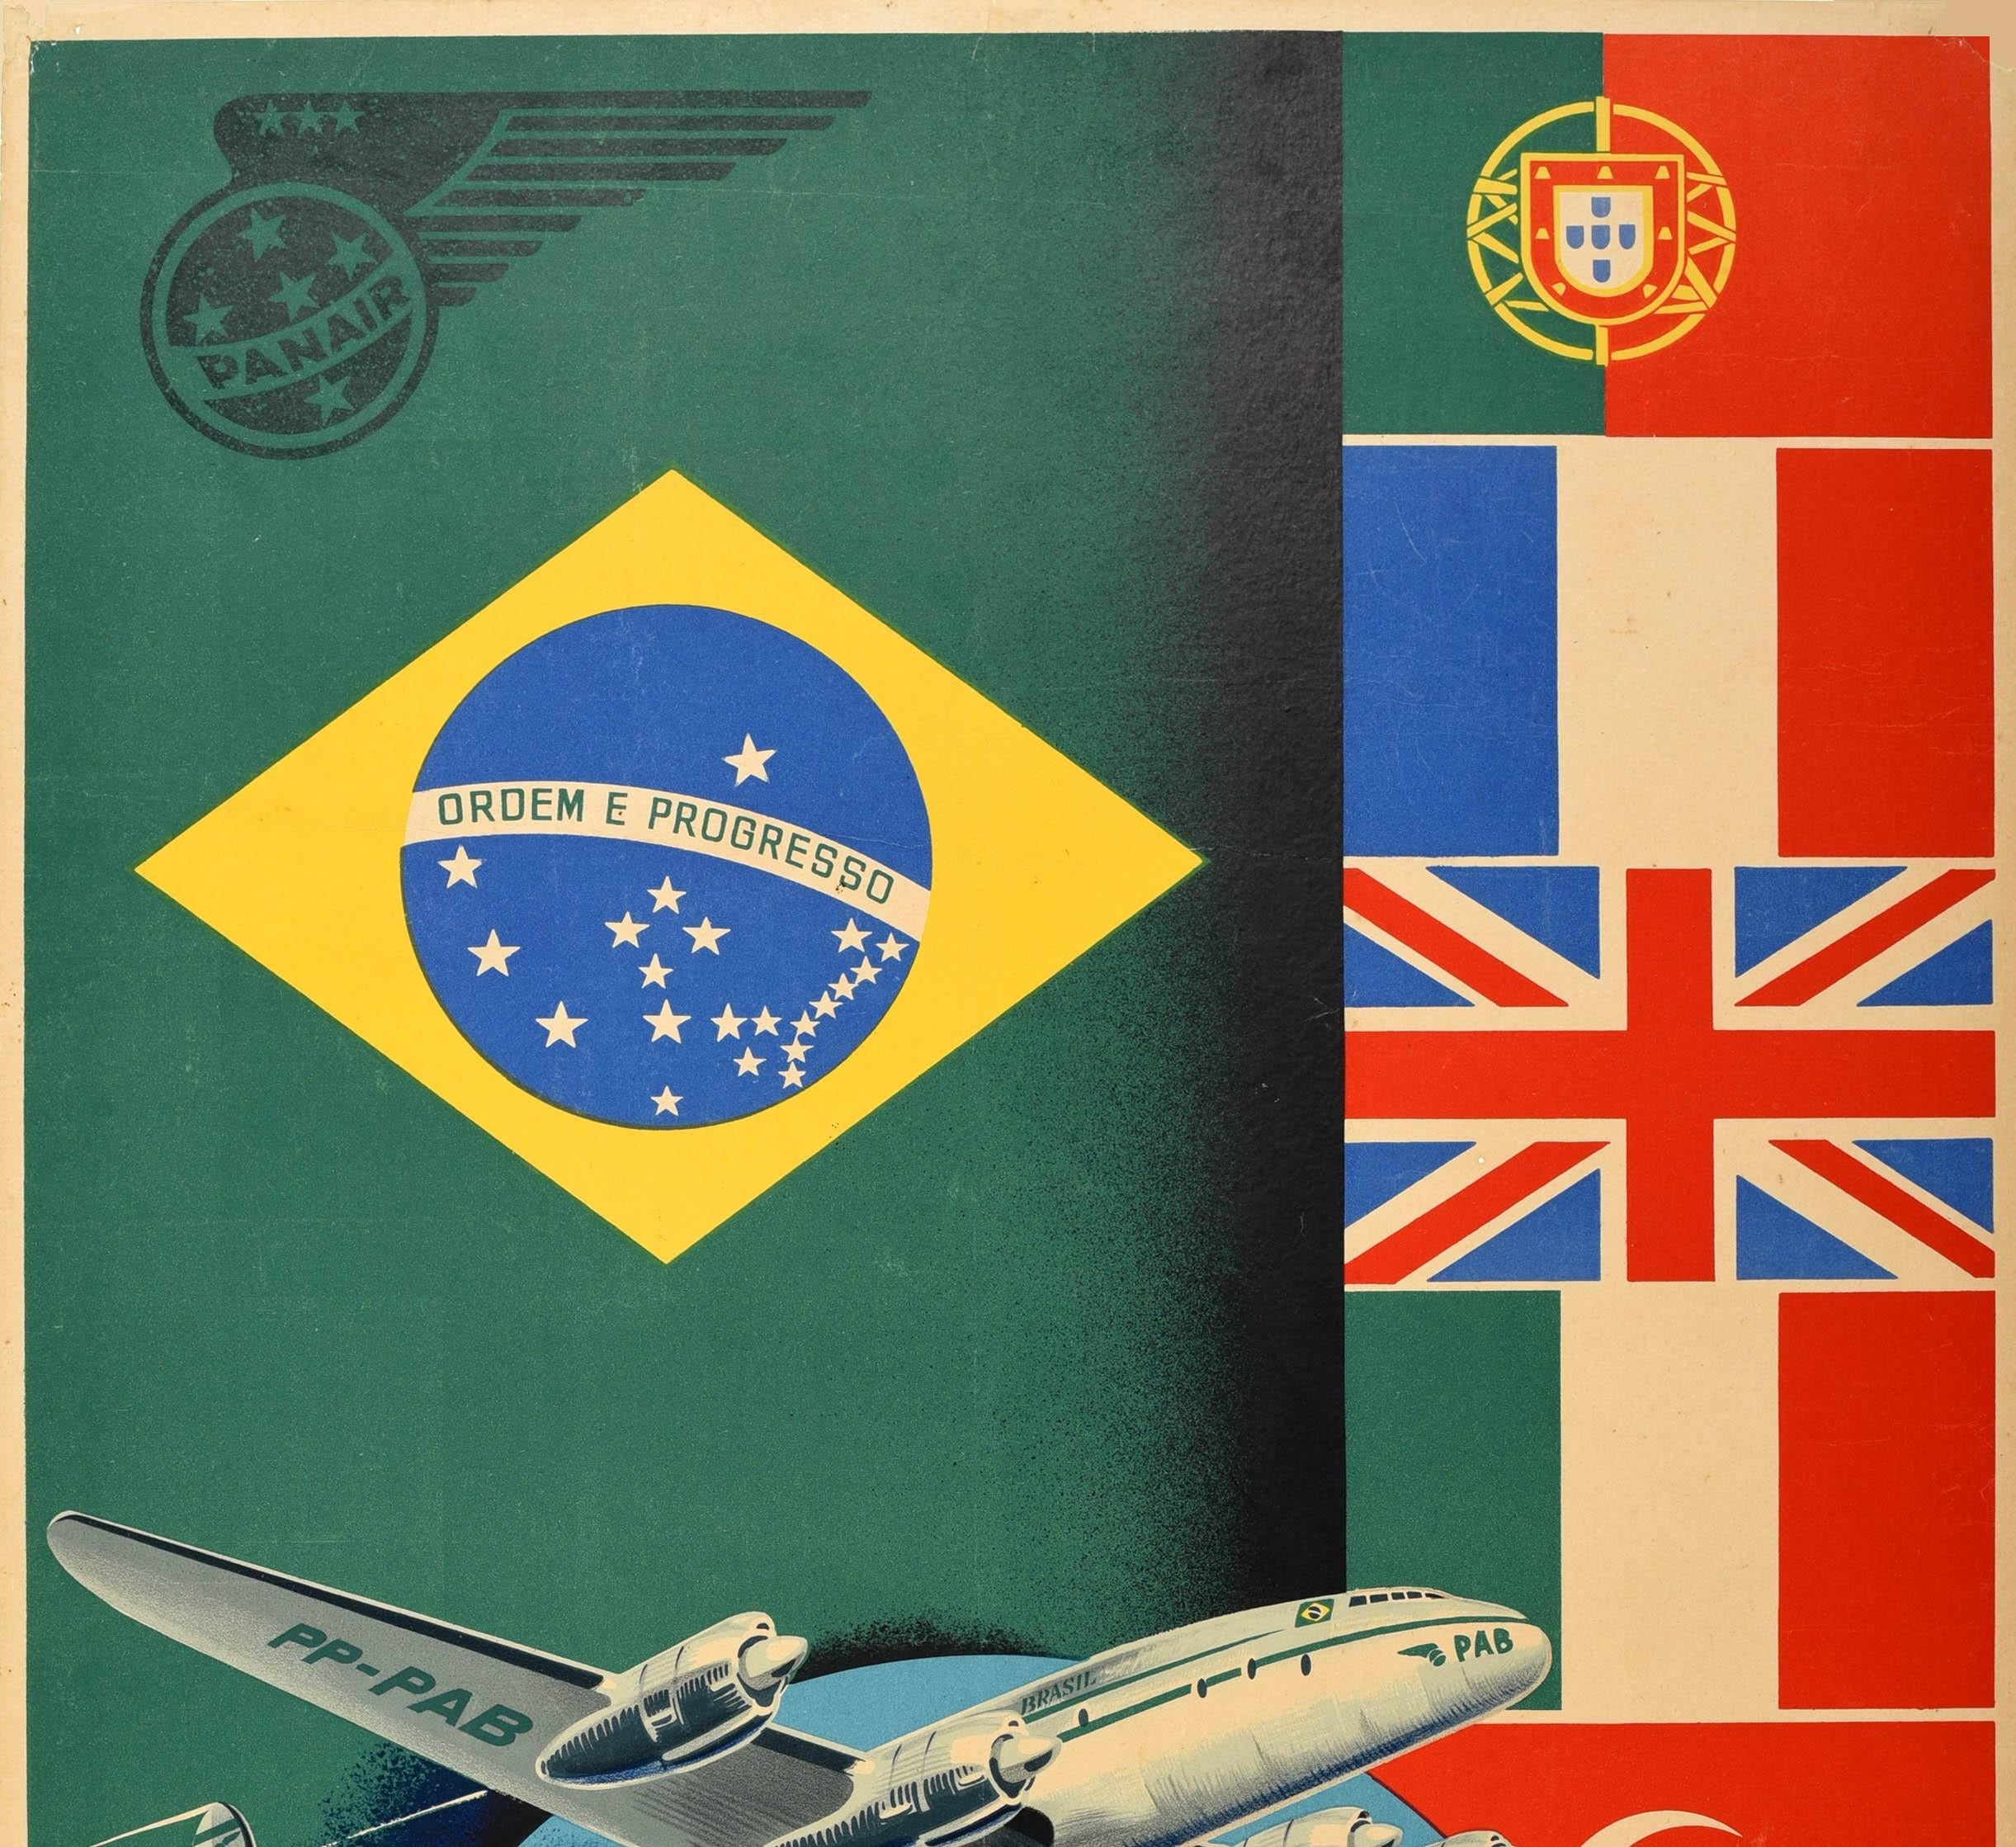 Original vintage travel advertising poster for Panair Do Brasil featuring a plane flying at speed in front of a globe marking the airline route around the world from Europe and Africa across the Atlantic Ocean to South America - London Paris